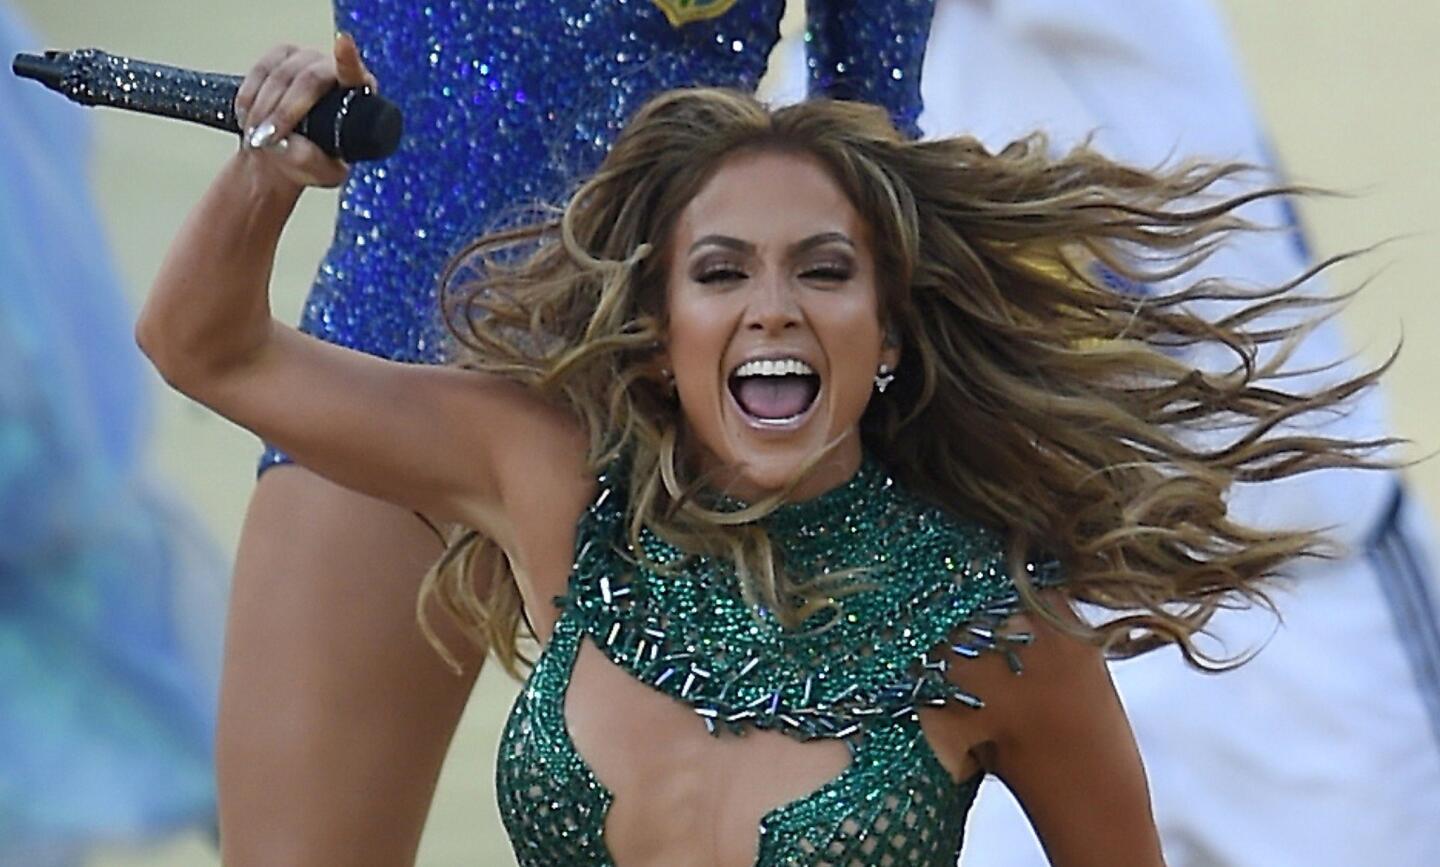 Jennifer Lopez starred in the opening ceremony of the 2014 FIFA World Cup at Corinthians Arena in Sao Paulo, Brazil, on Thursday.